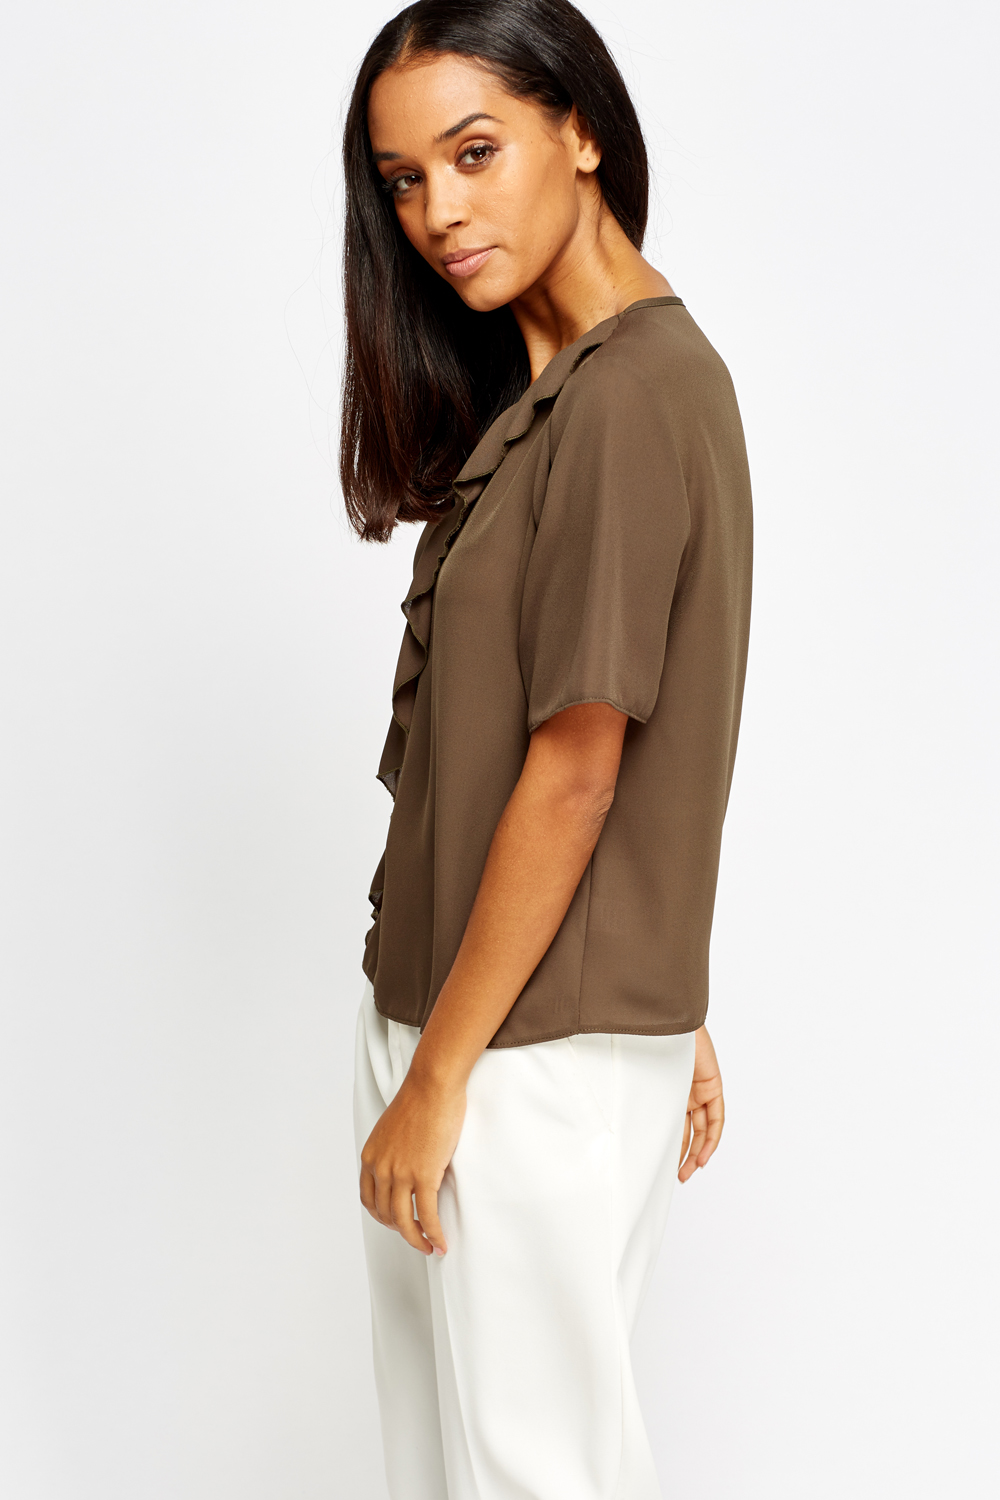 Ruffle Front Top - Olive - Just $6